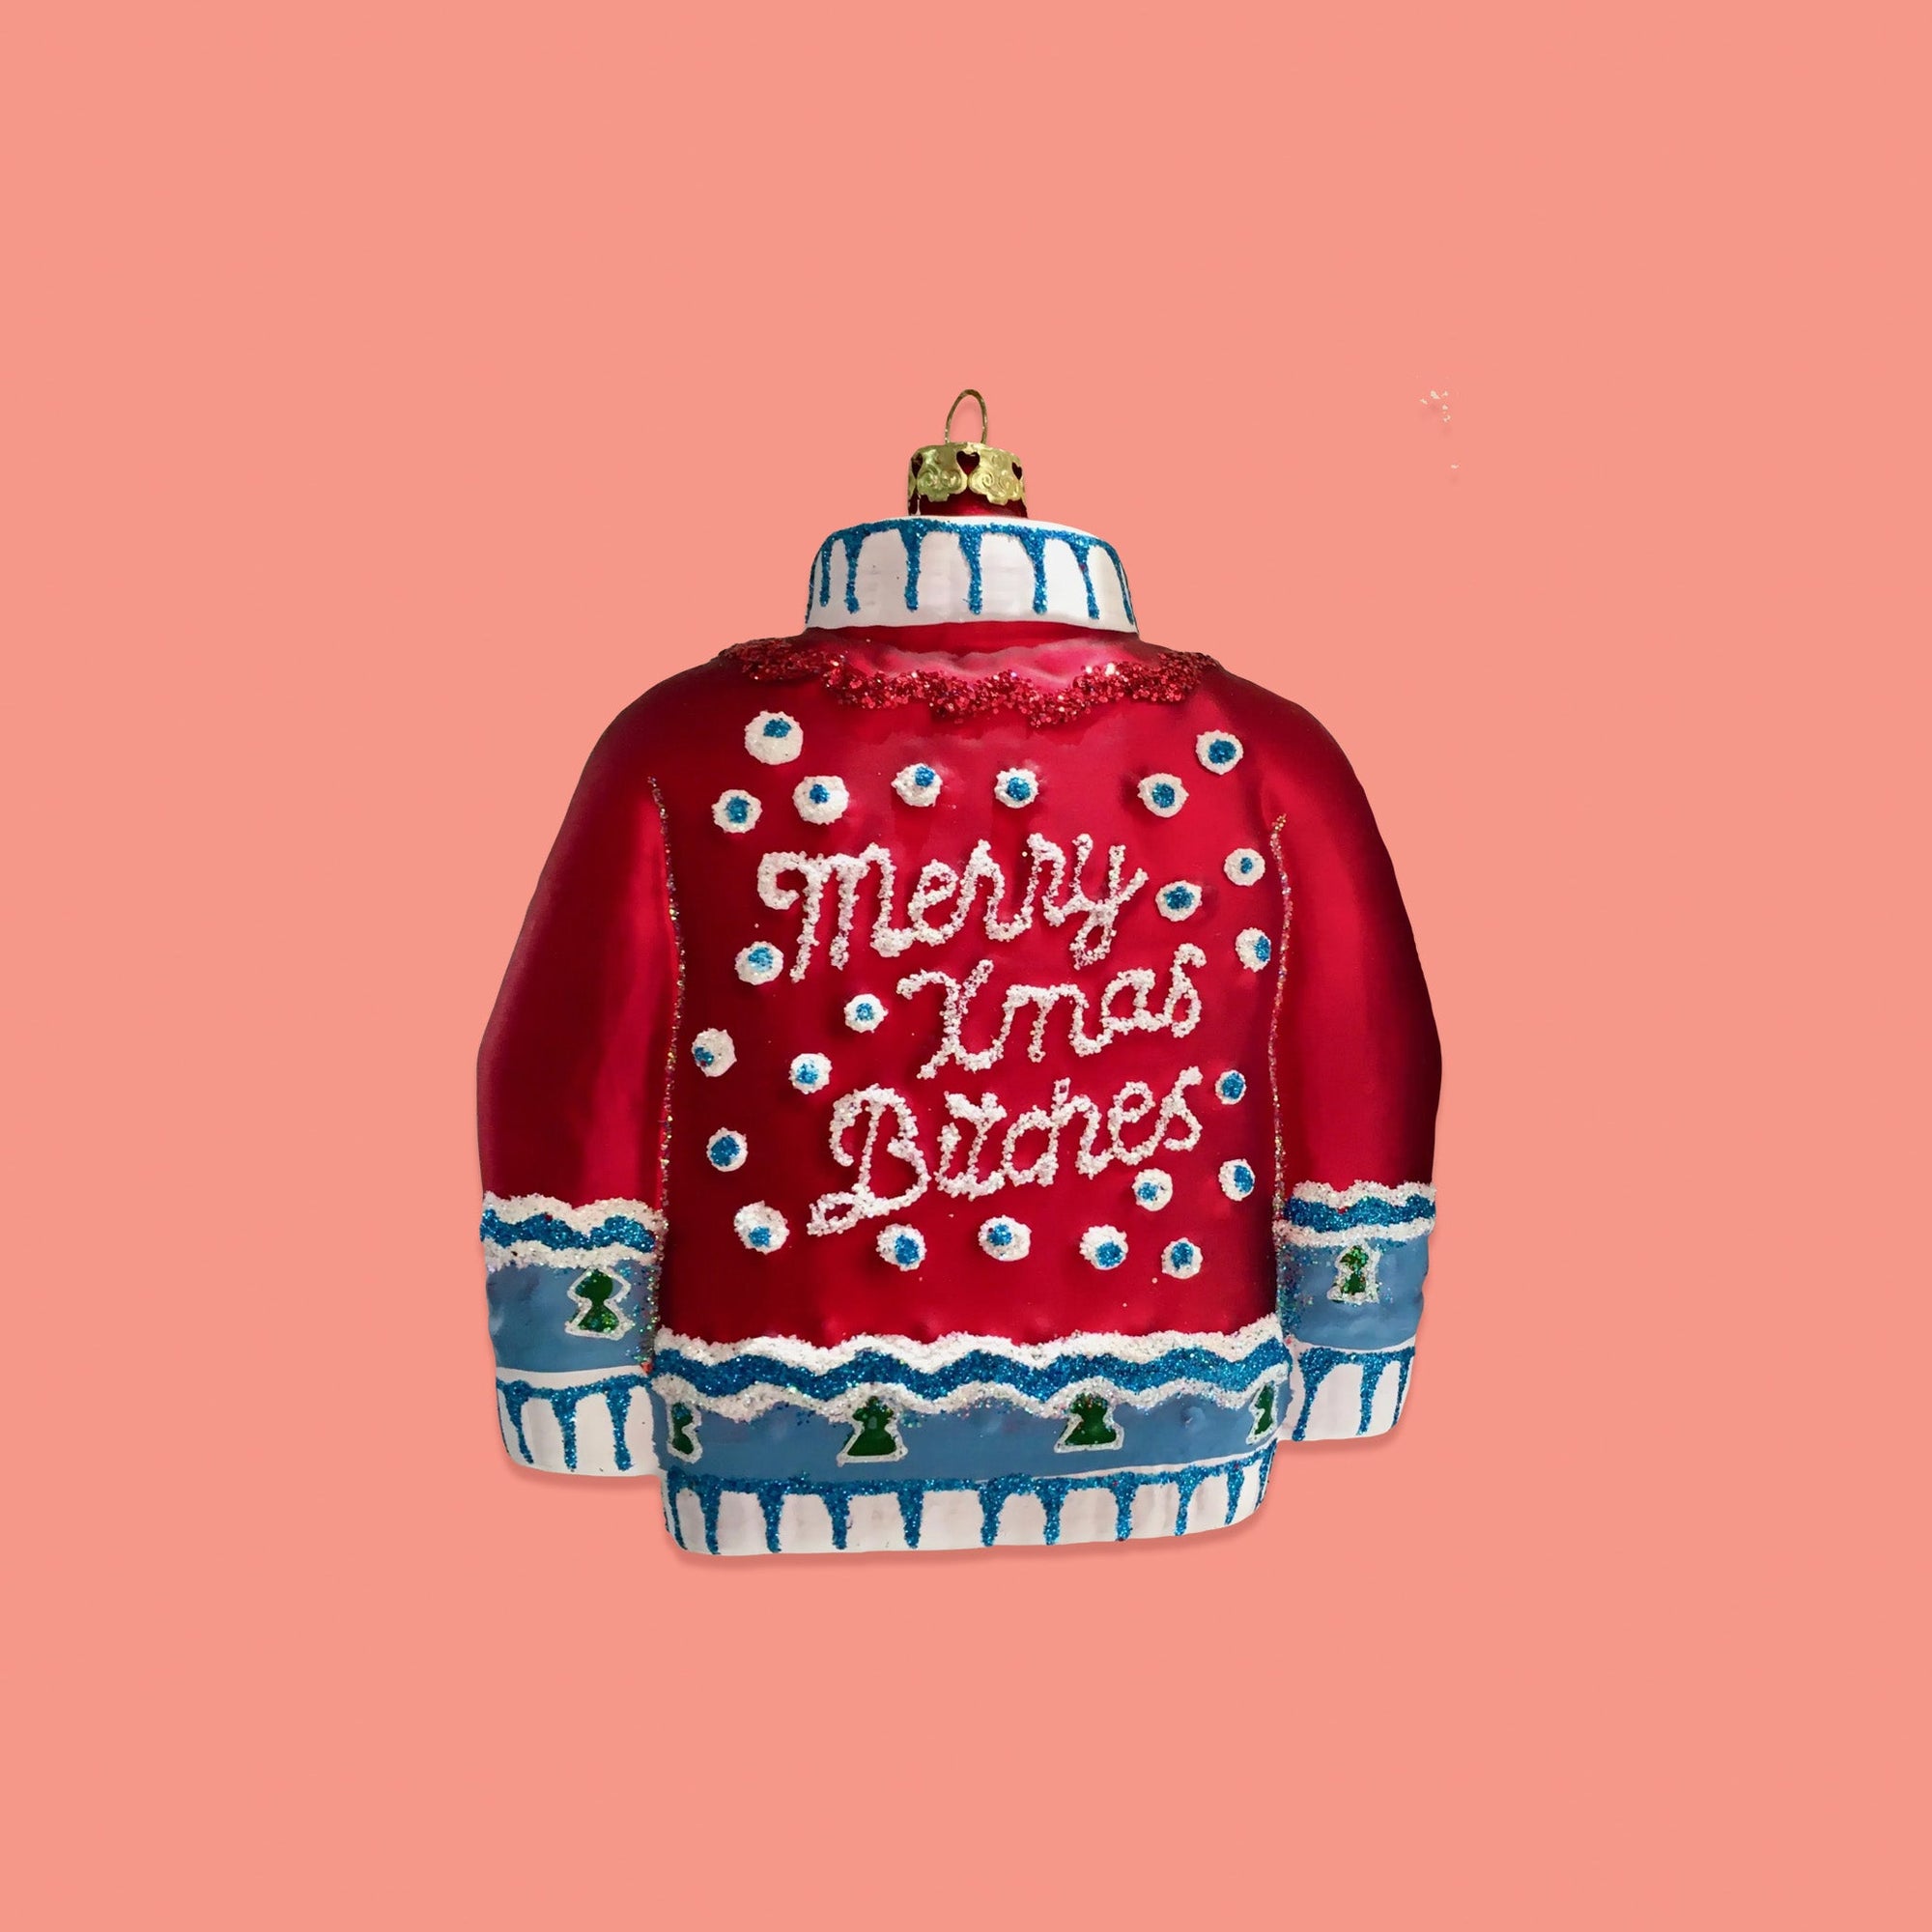 On a coral pink background sits an ornament. This ugly sweater inspired glass ornament is red and blue with white dpts and it says "Merry Xmas Bitches" in white glitter script lettering. There is red, white and blue glitter.